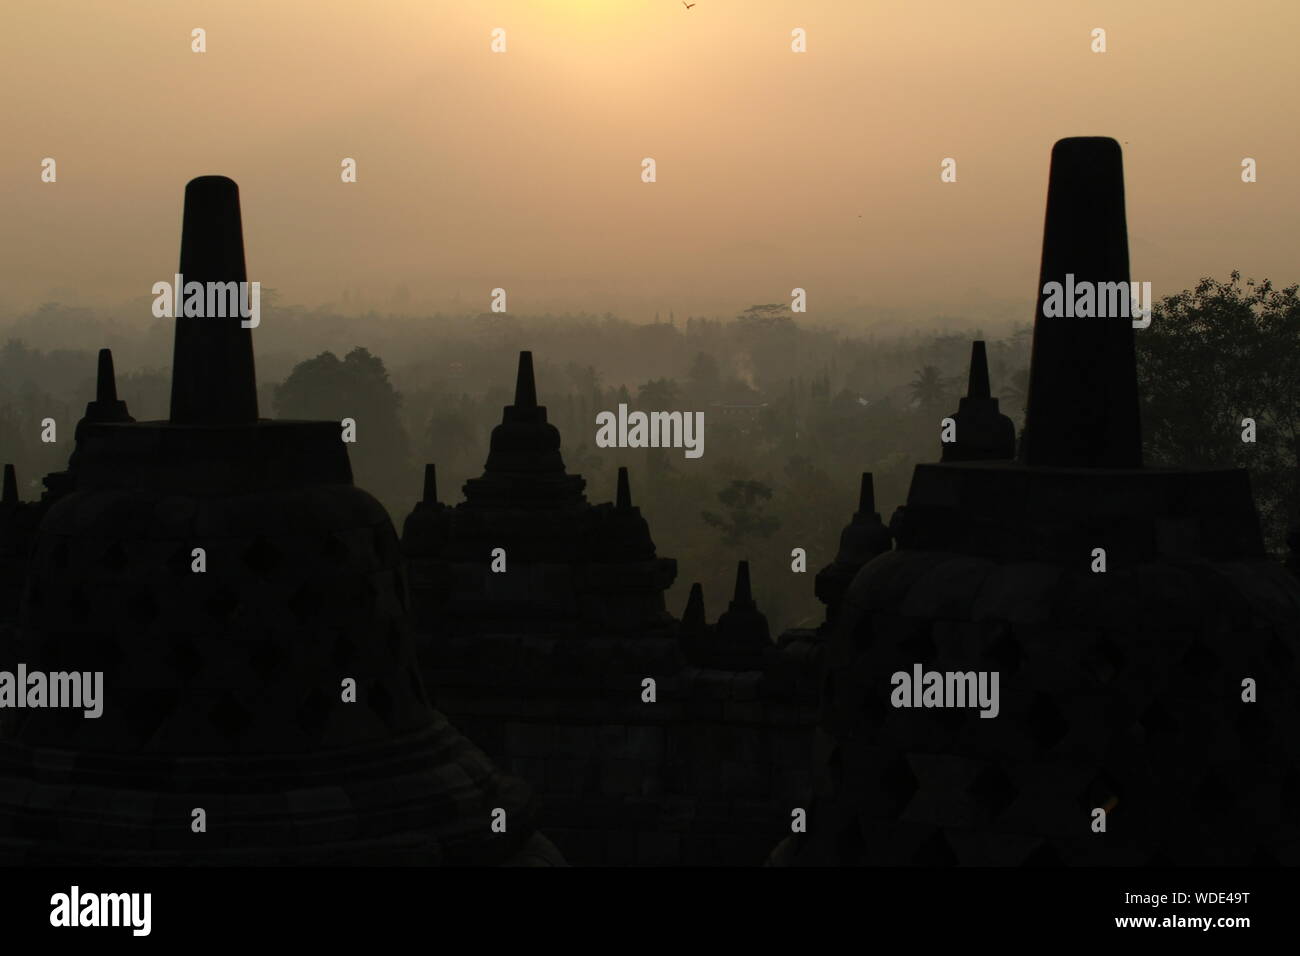 Silhouette Of Temple Building At Sunrise Stock Photo